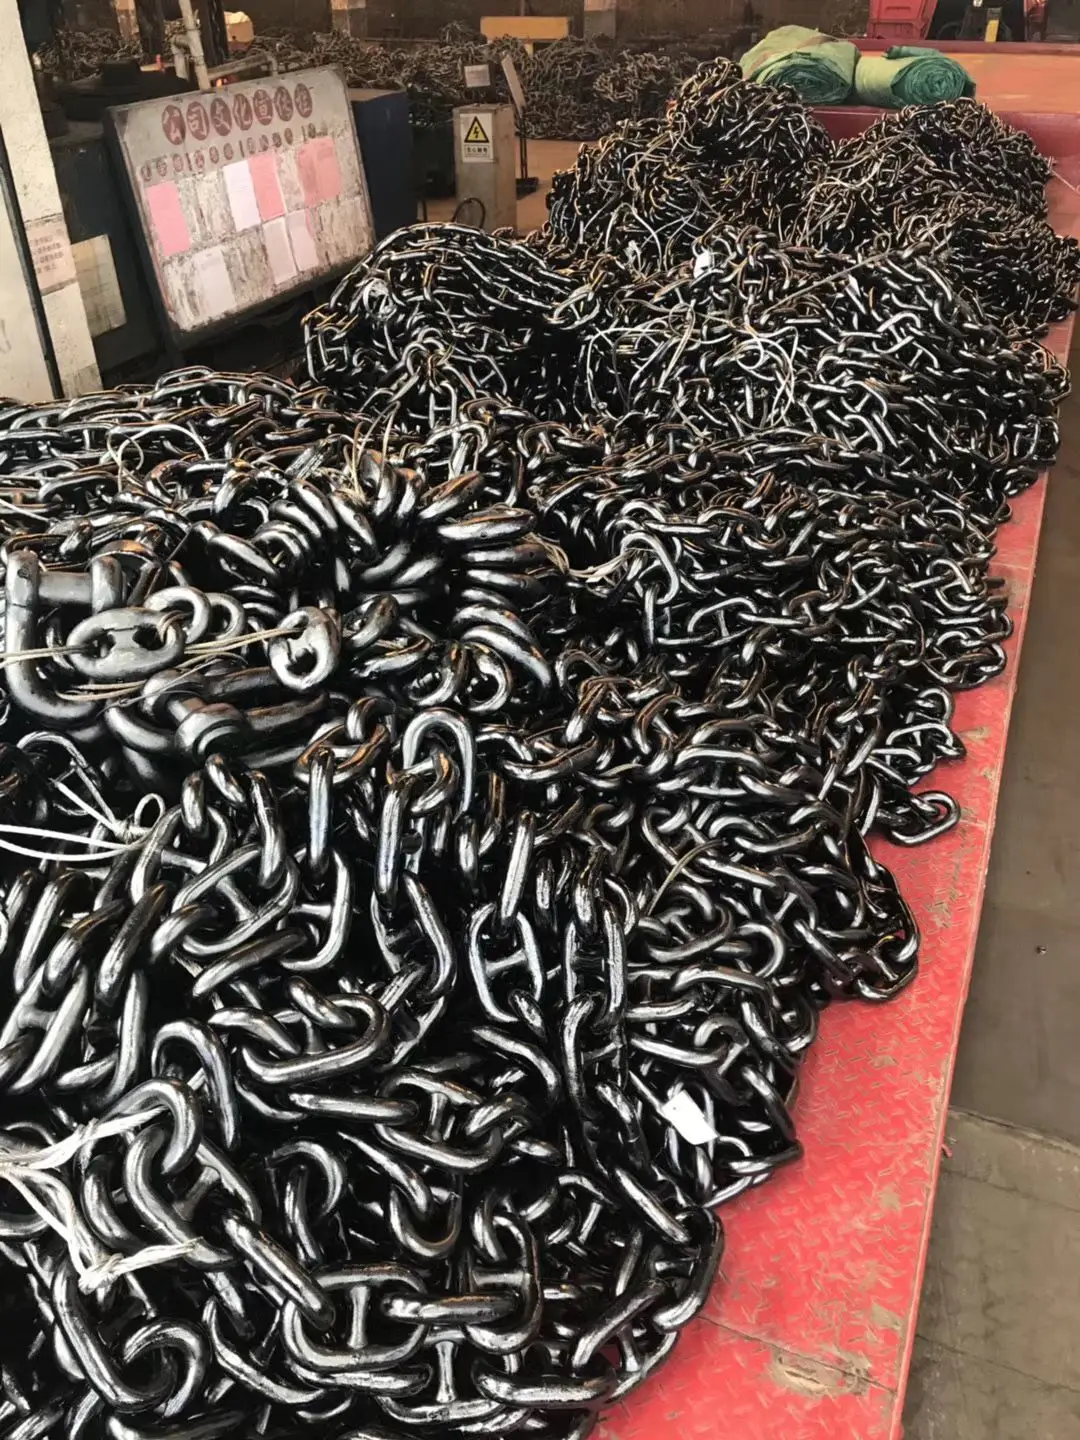 G80 Japanese Offshore Heavy Duty Industrial Steel Link Chain Marine Ship Mooring Stainless Steel Stud Link Anchor Chain